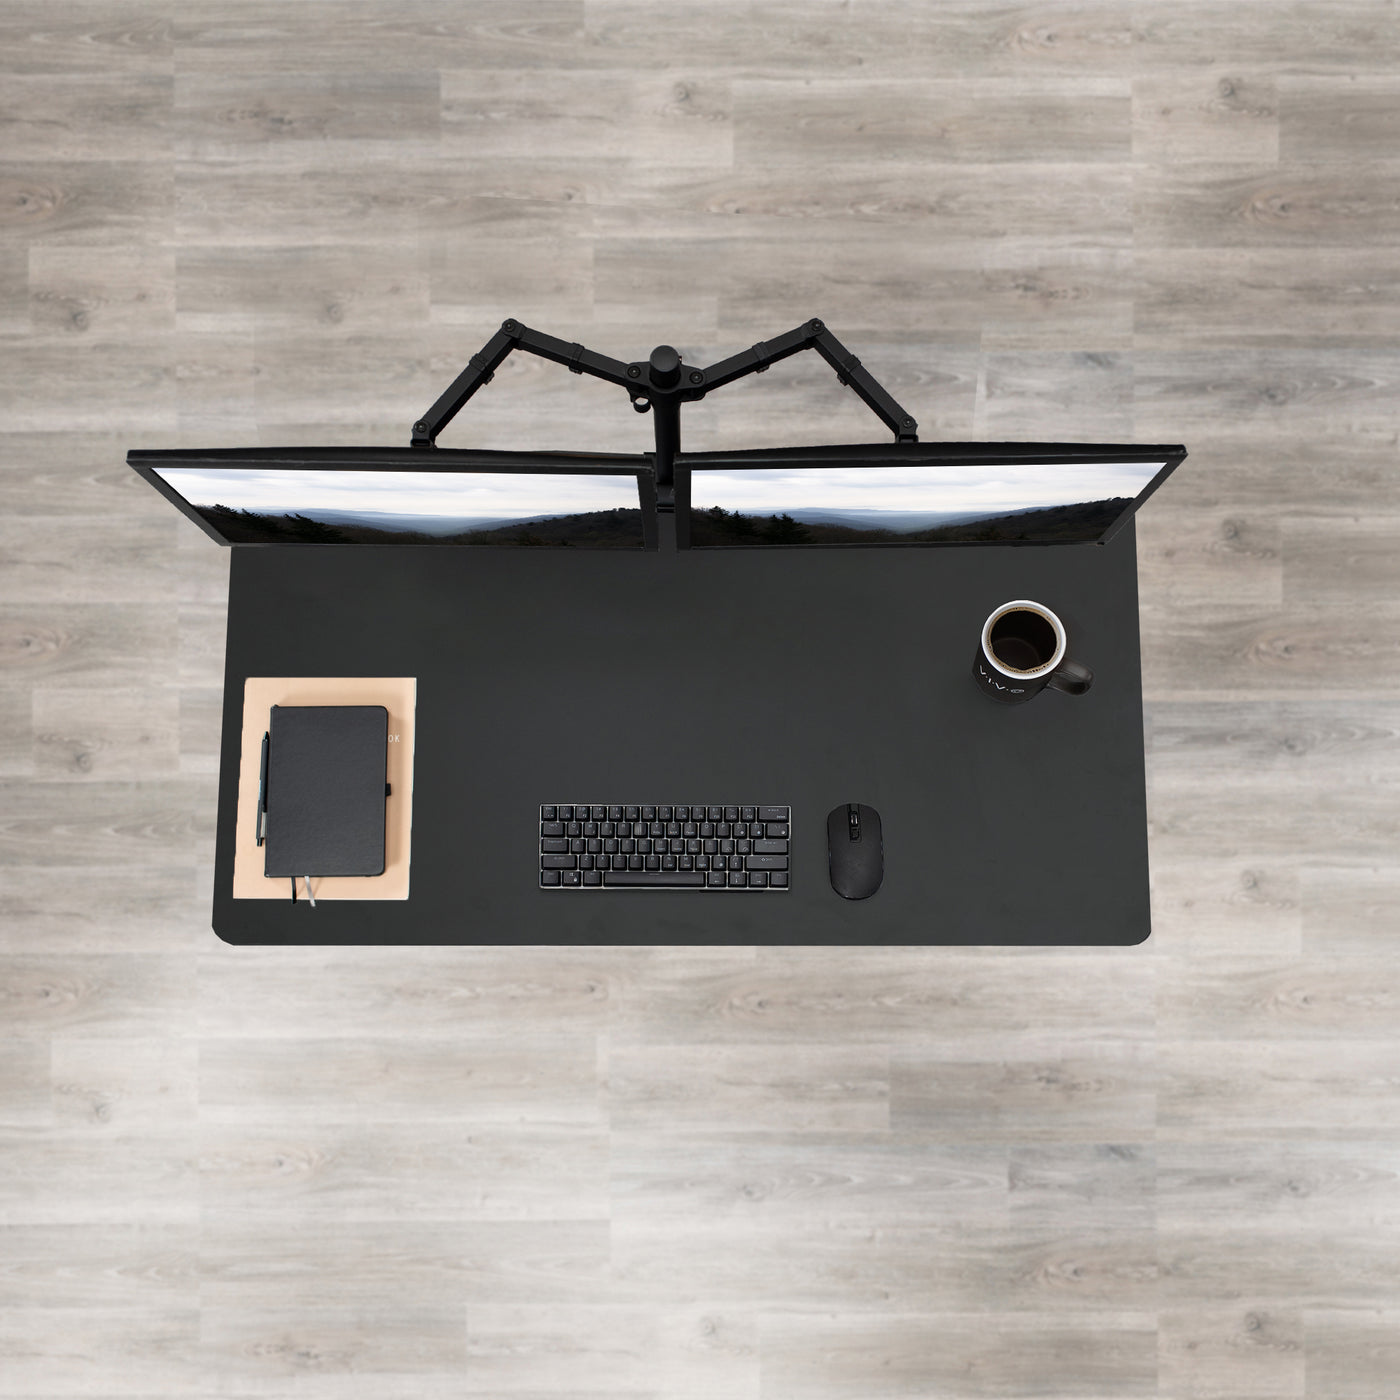 Spacious desk design to comfortably hold all your office equipment.